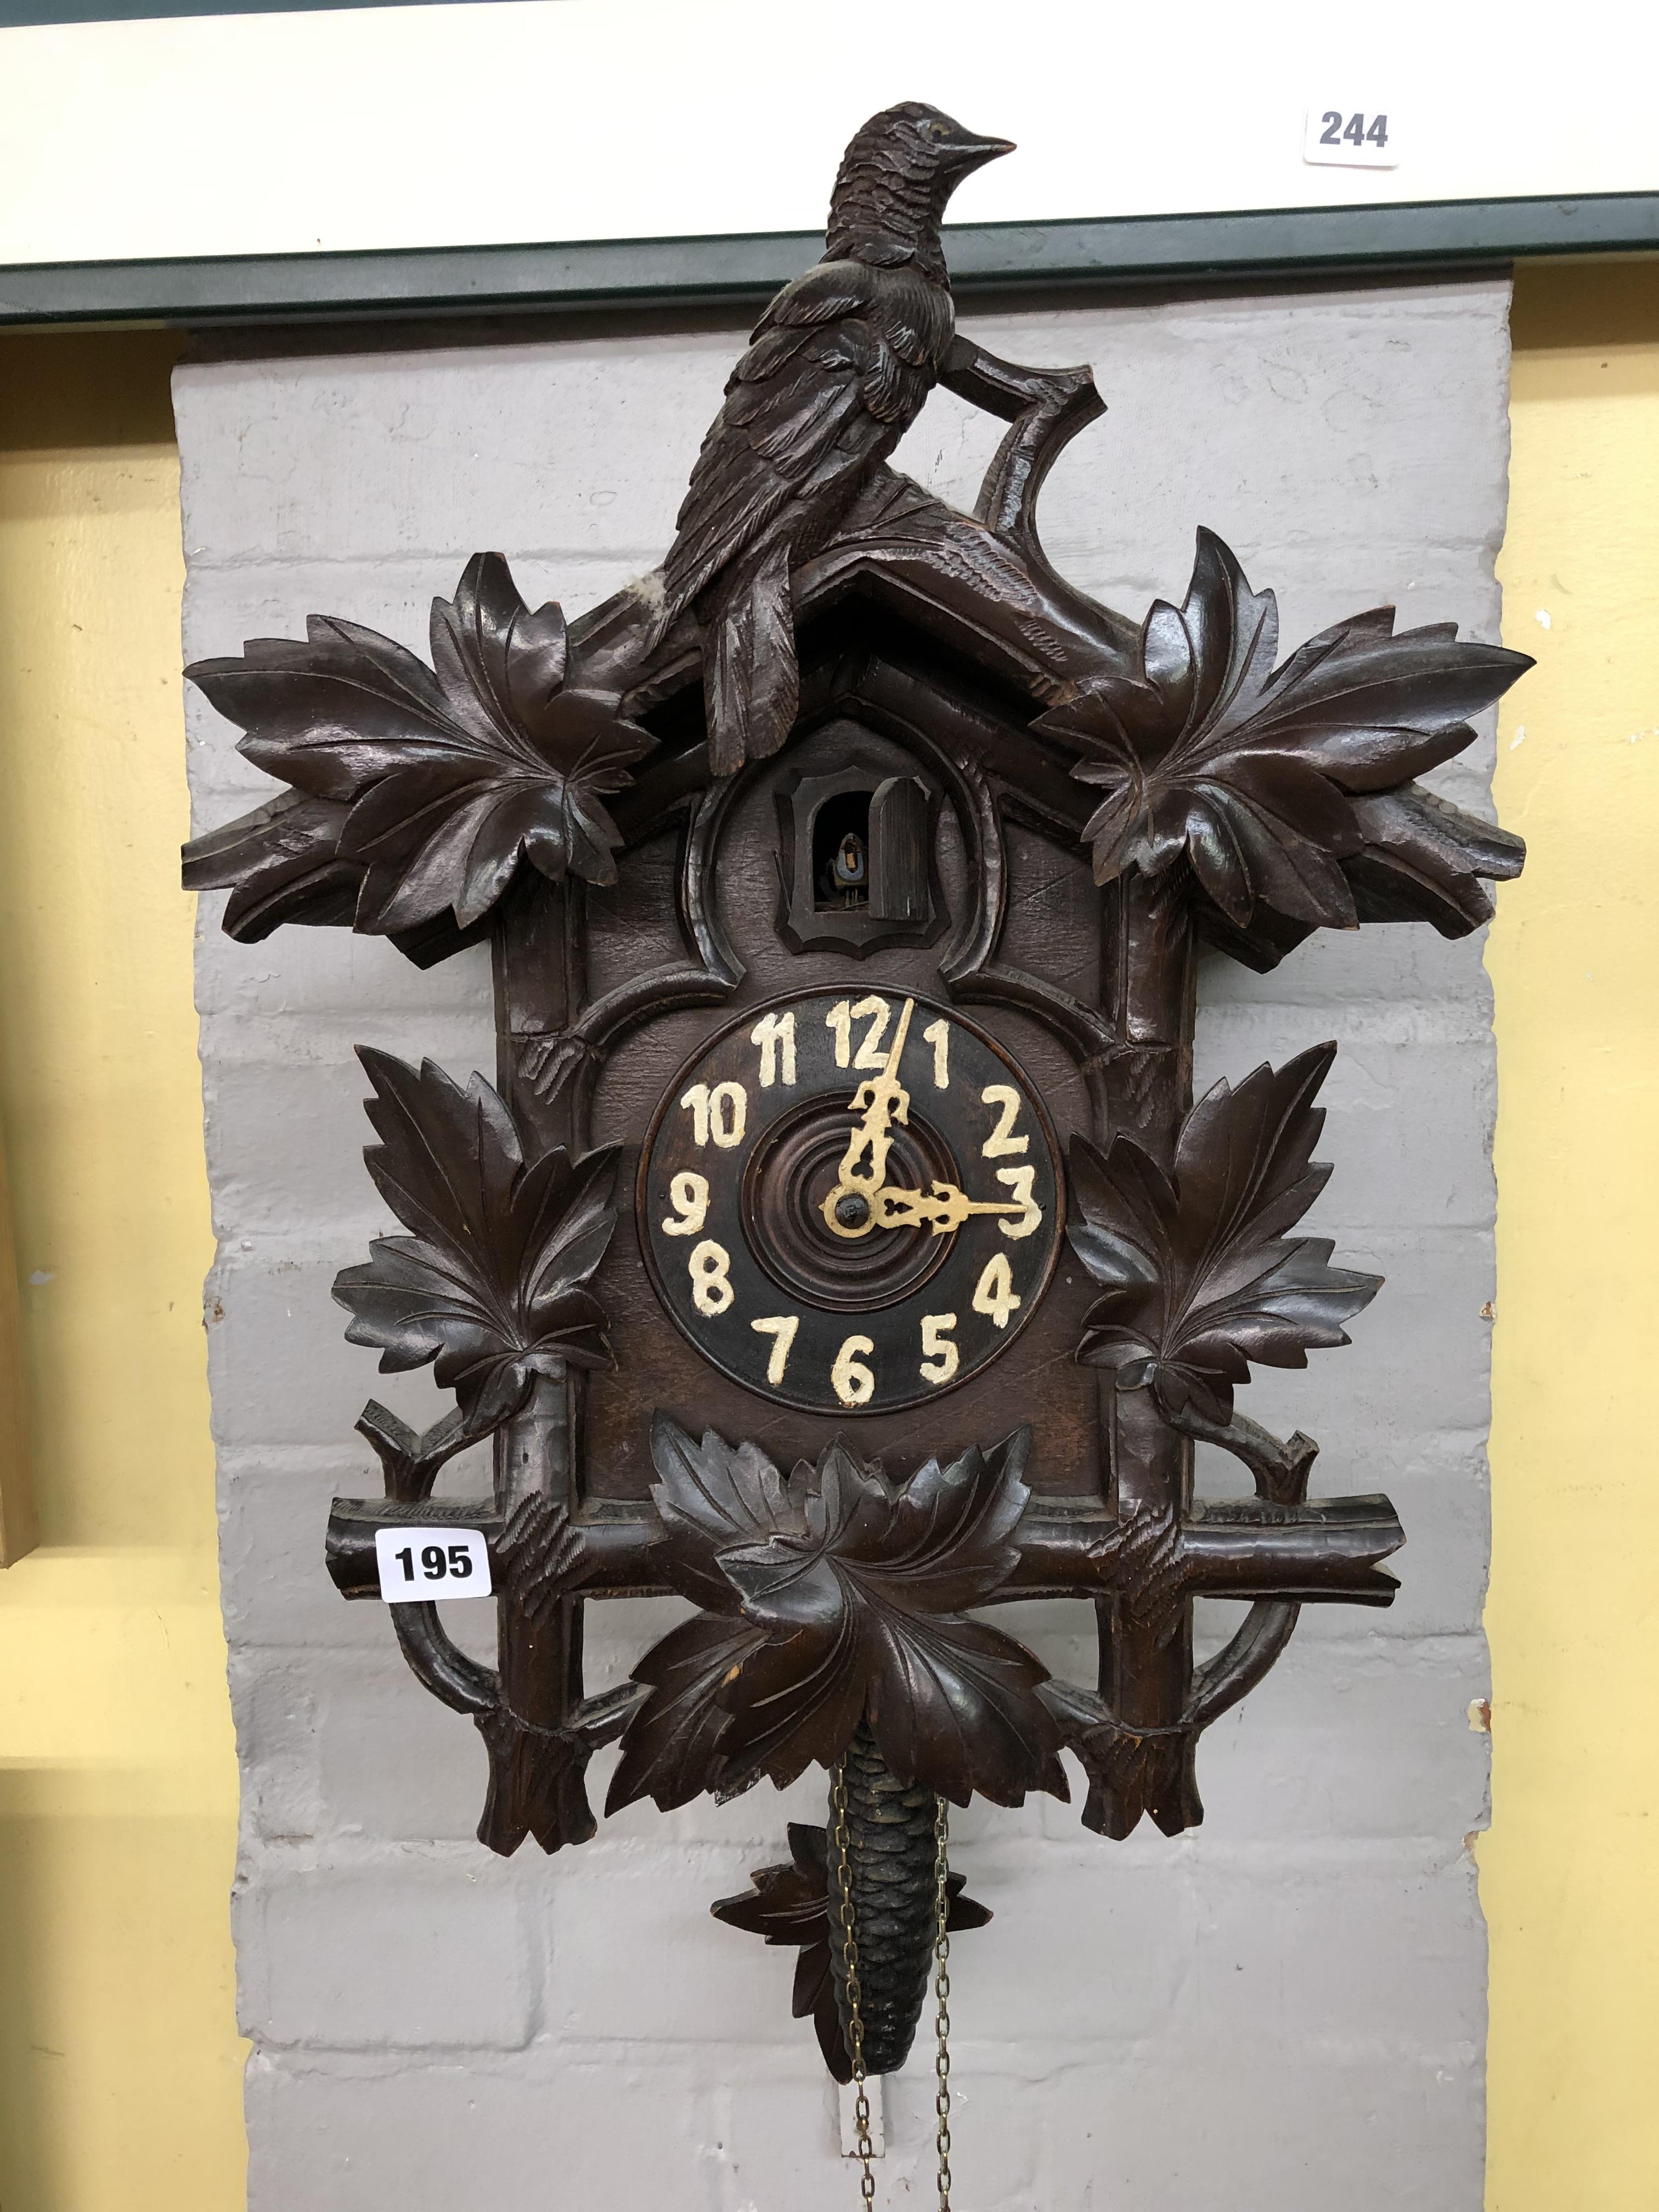 LATE 19TH CENTURY/EARLY 20TH CENTURY BAVARIAN CARVED CUCKOO CLOCK,